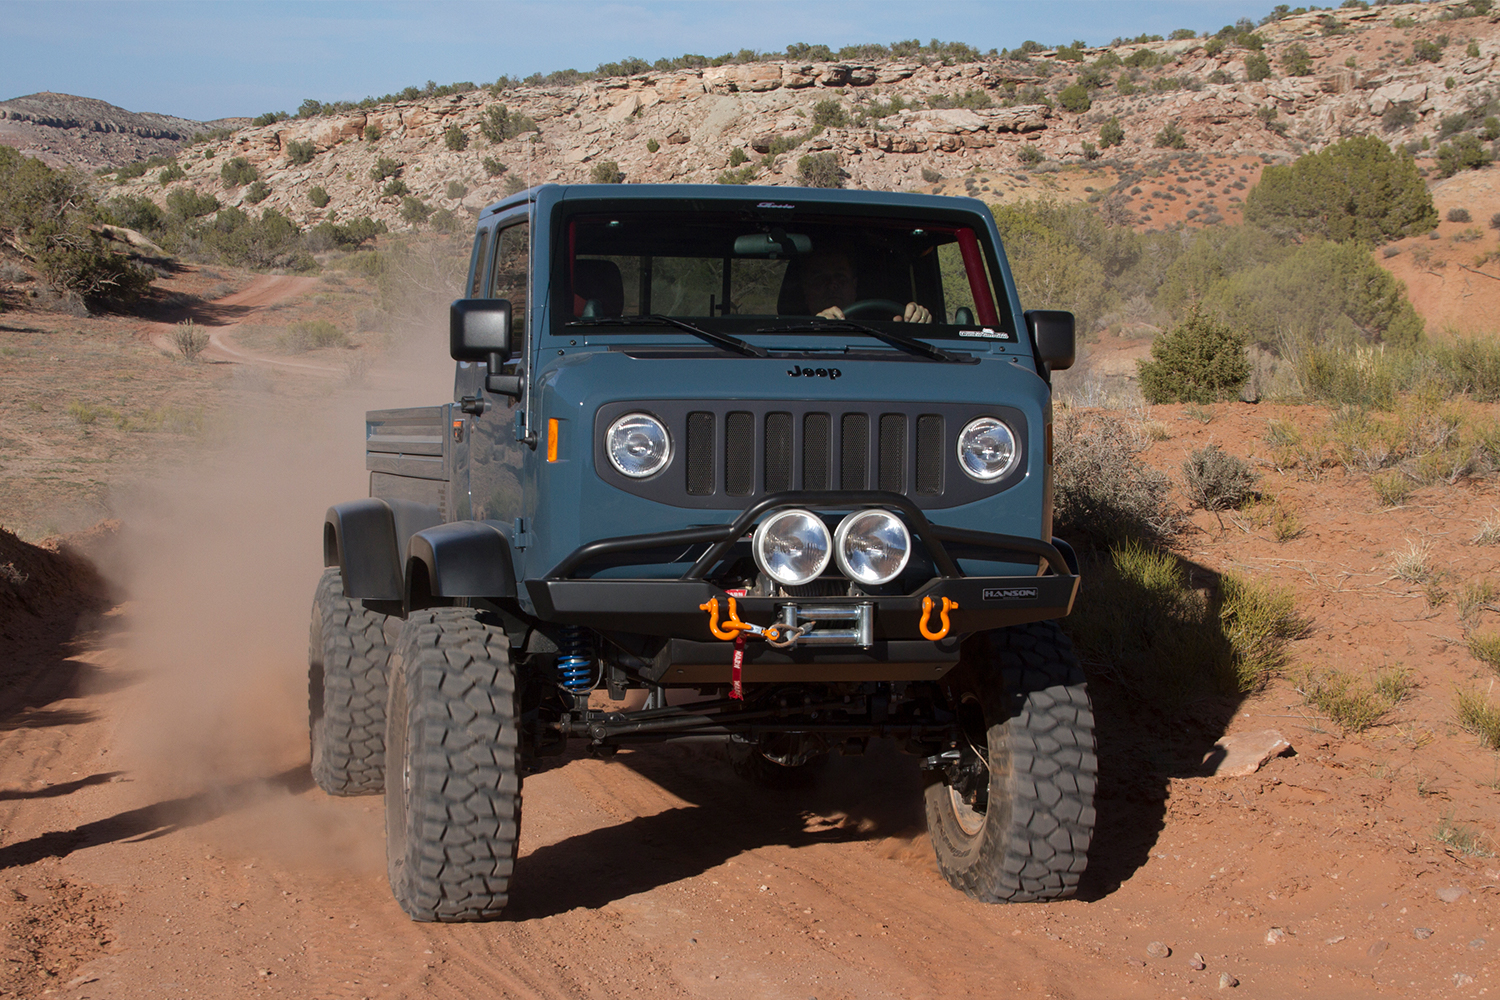 The Jeep Mighty FC cab-over-engine pickup truck driving in Moab